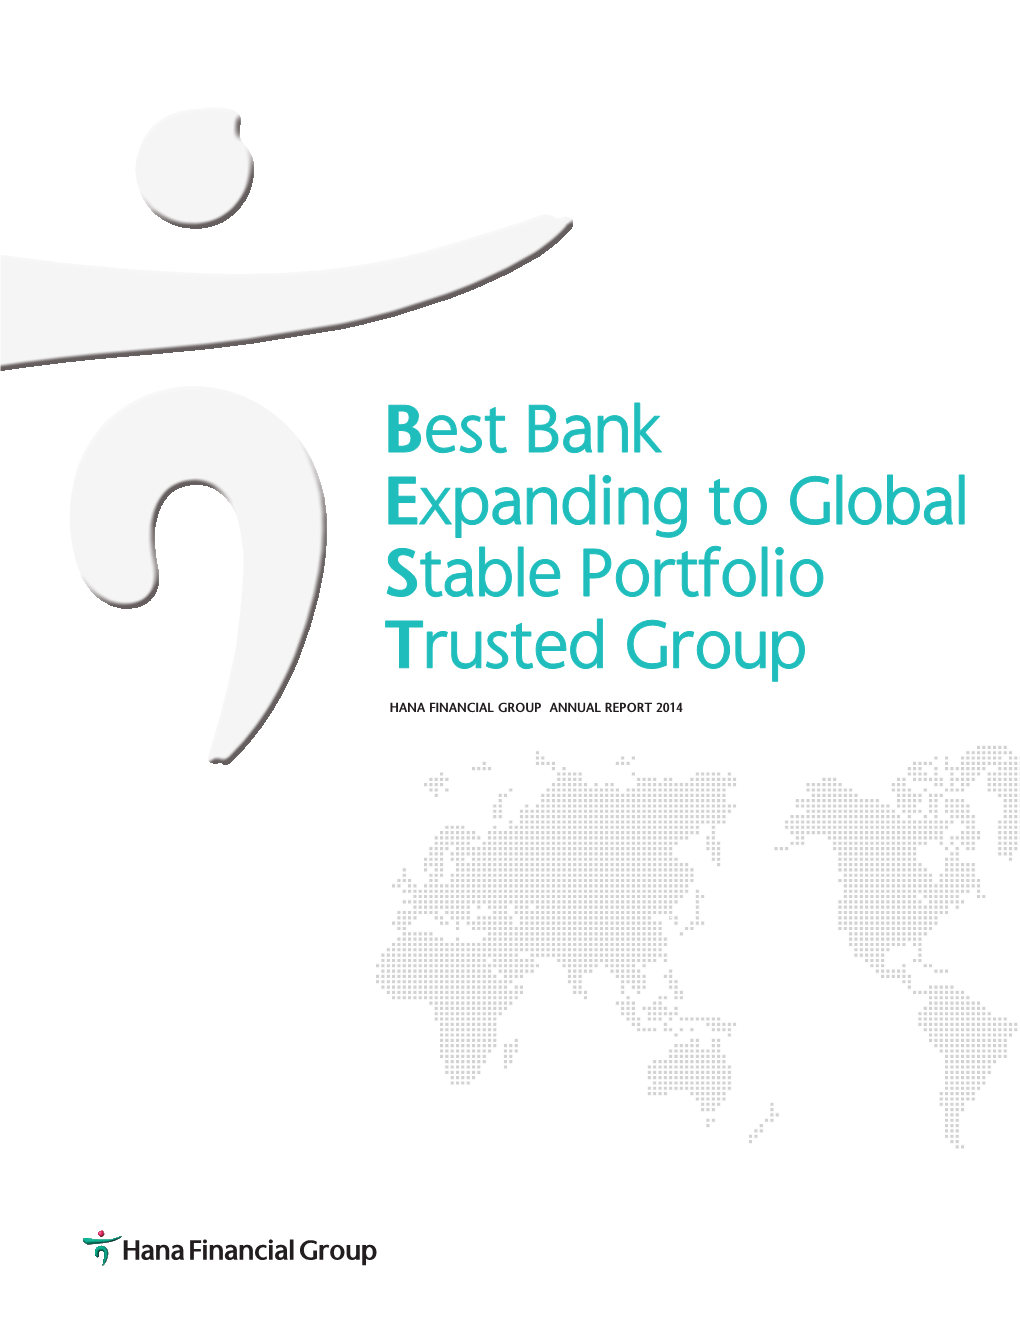 Best Bank Expanding to Global Stable Portfolio Trusted Group